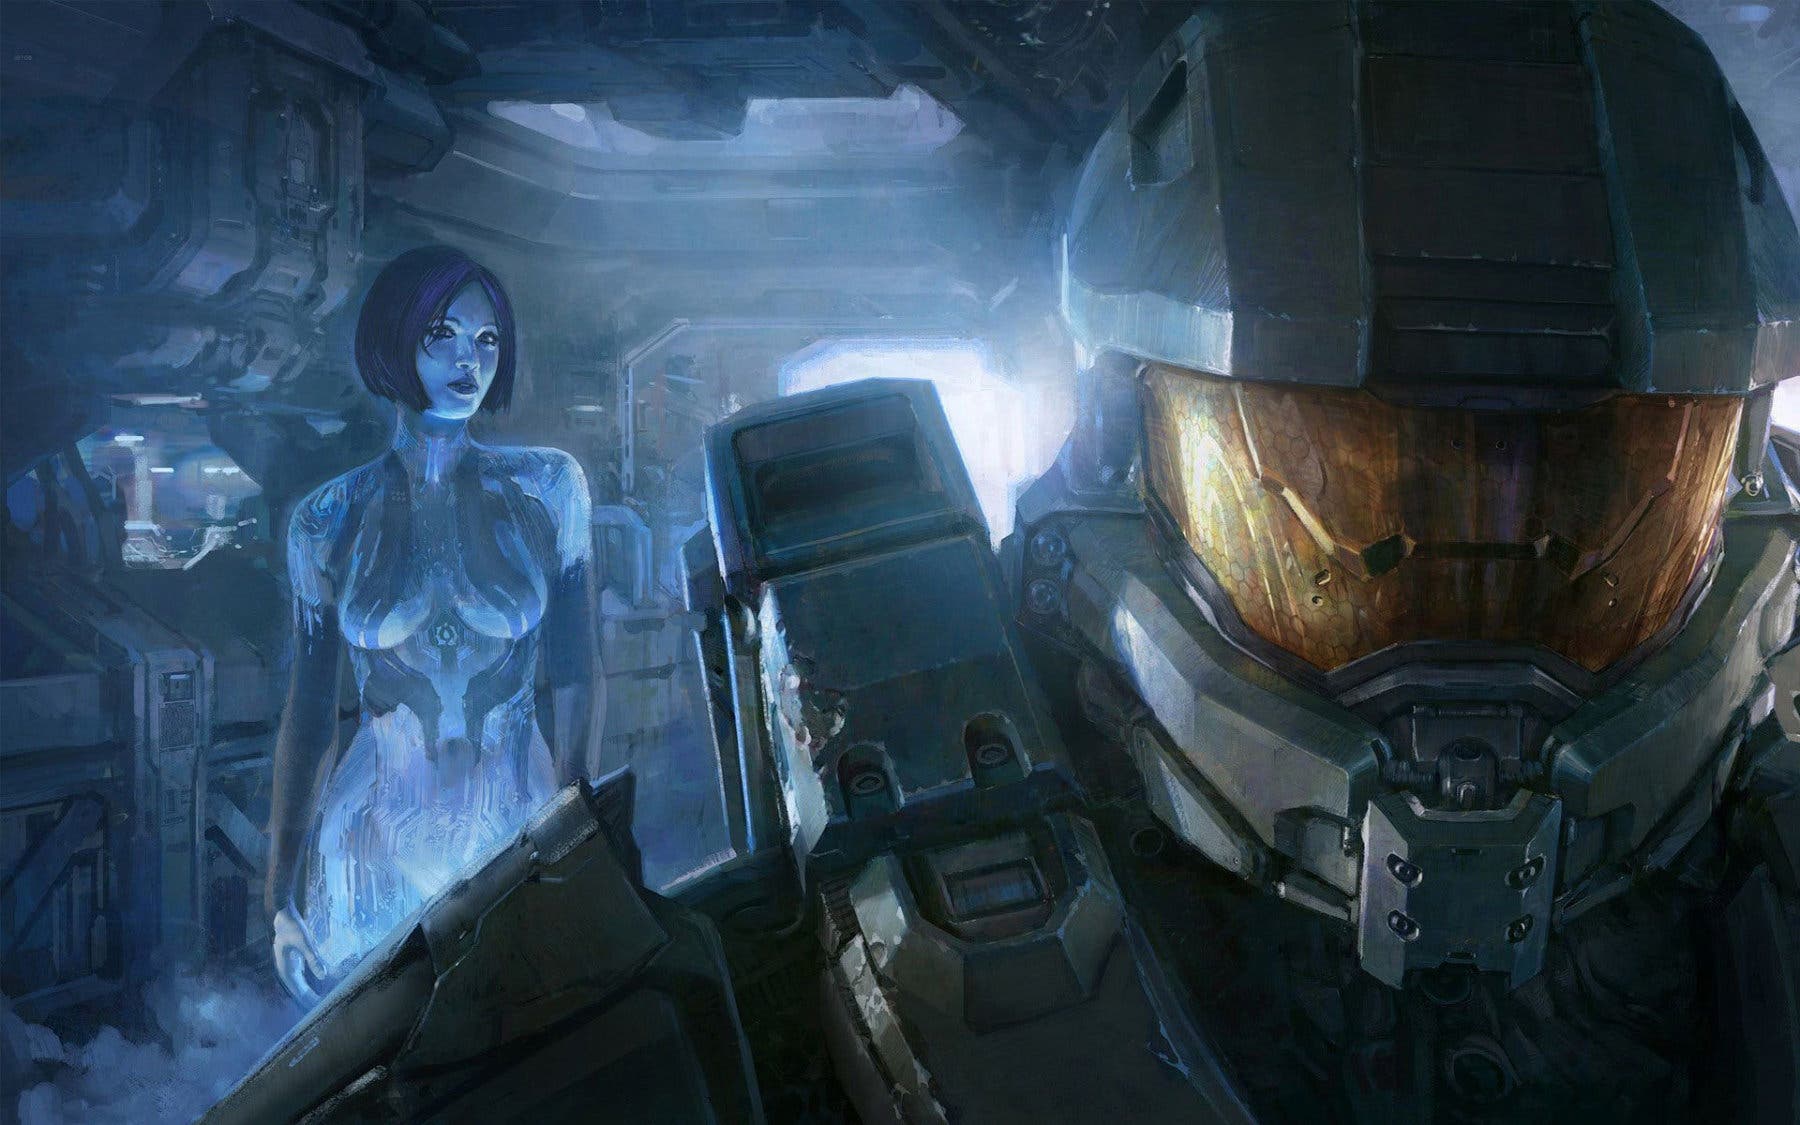 halo 5 everything we know about master chief being a traitor in guardians halo 5 321858